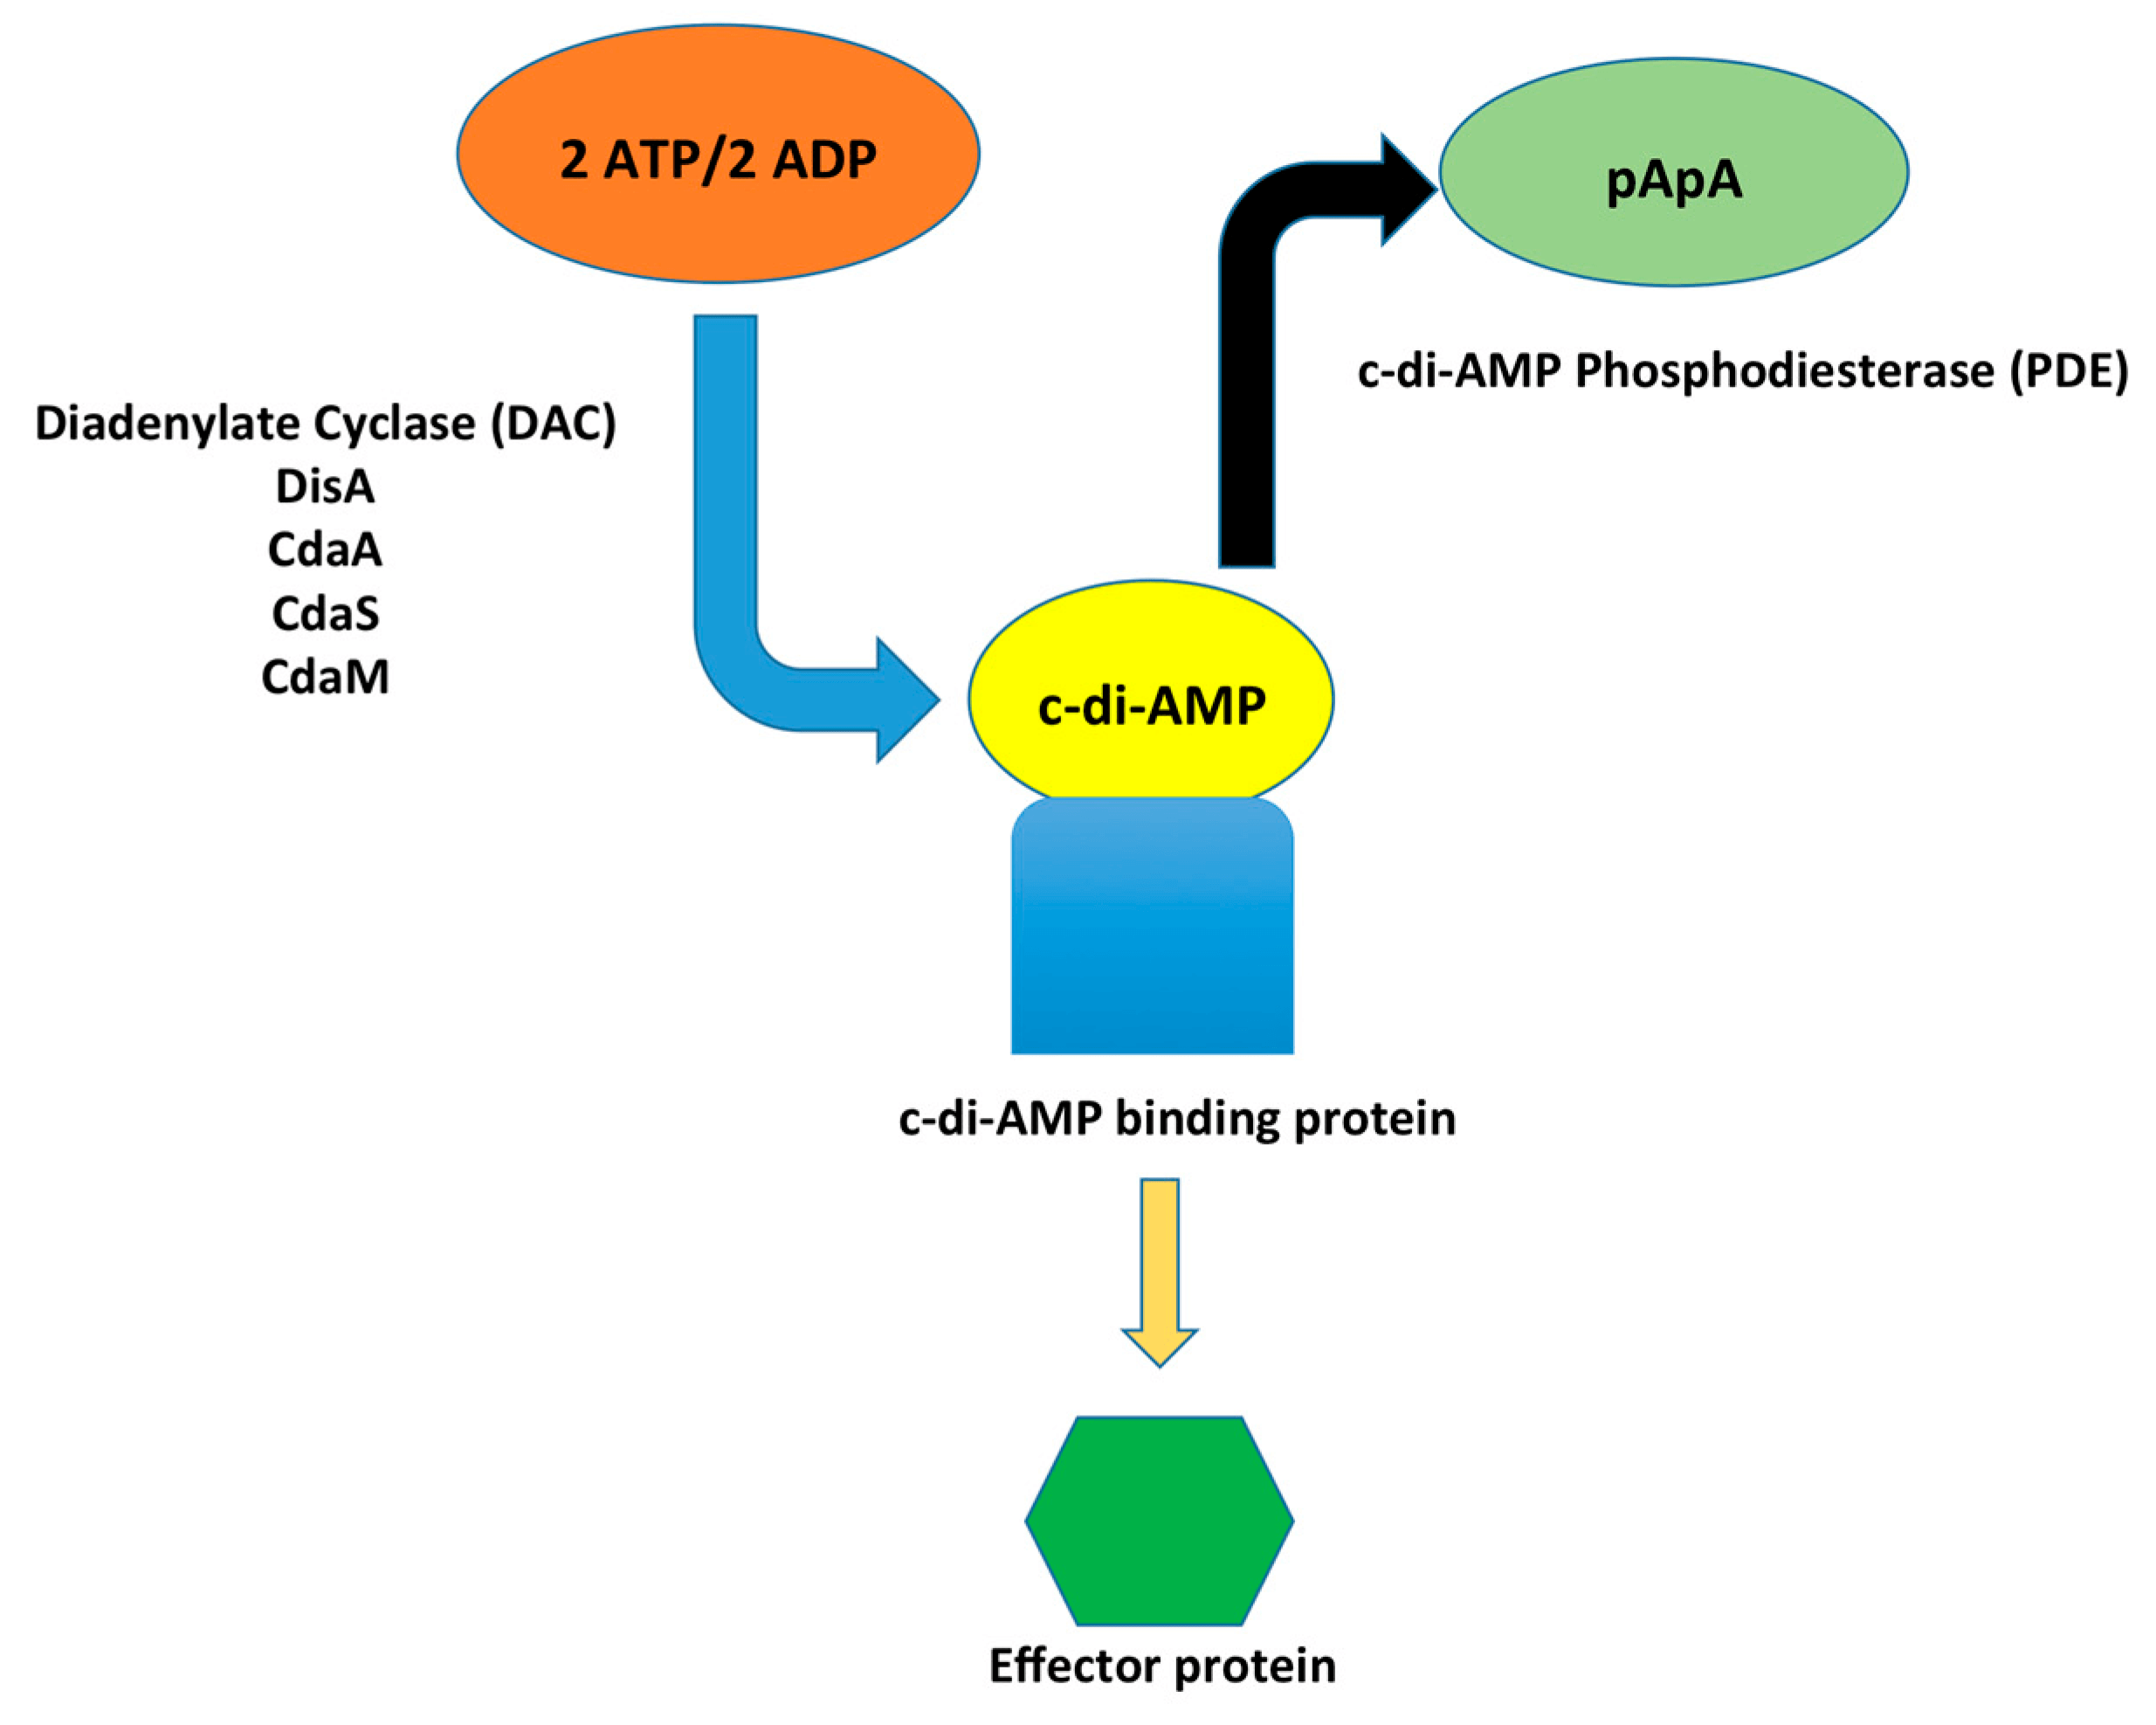 Diadenylate cyclase (DAC) enzymes synthesize c-di-AMP through a condensation reaction of two ATP or two ADP molecules. c-di-AMP binds to specific target proteins, thereby regulating the functions of downstream proteins within a variety of cellular pathways. To maintain appropriate levels of c-di-AMP, phosphodiesterases (PDEs) degrade c-di-AMP into pApA, which further degrades into AMP.